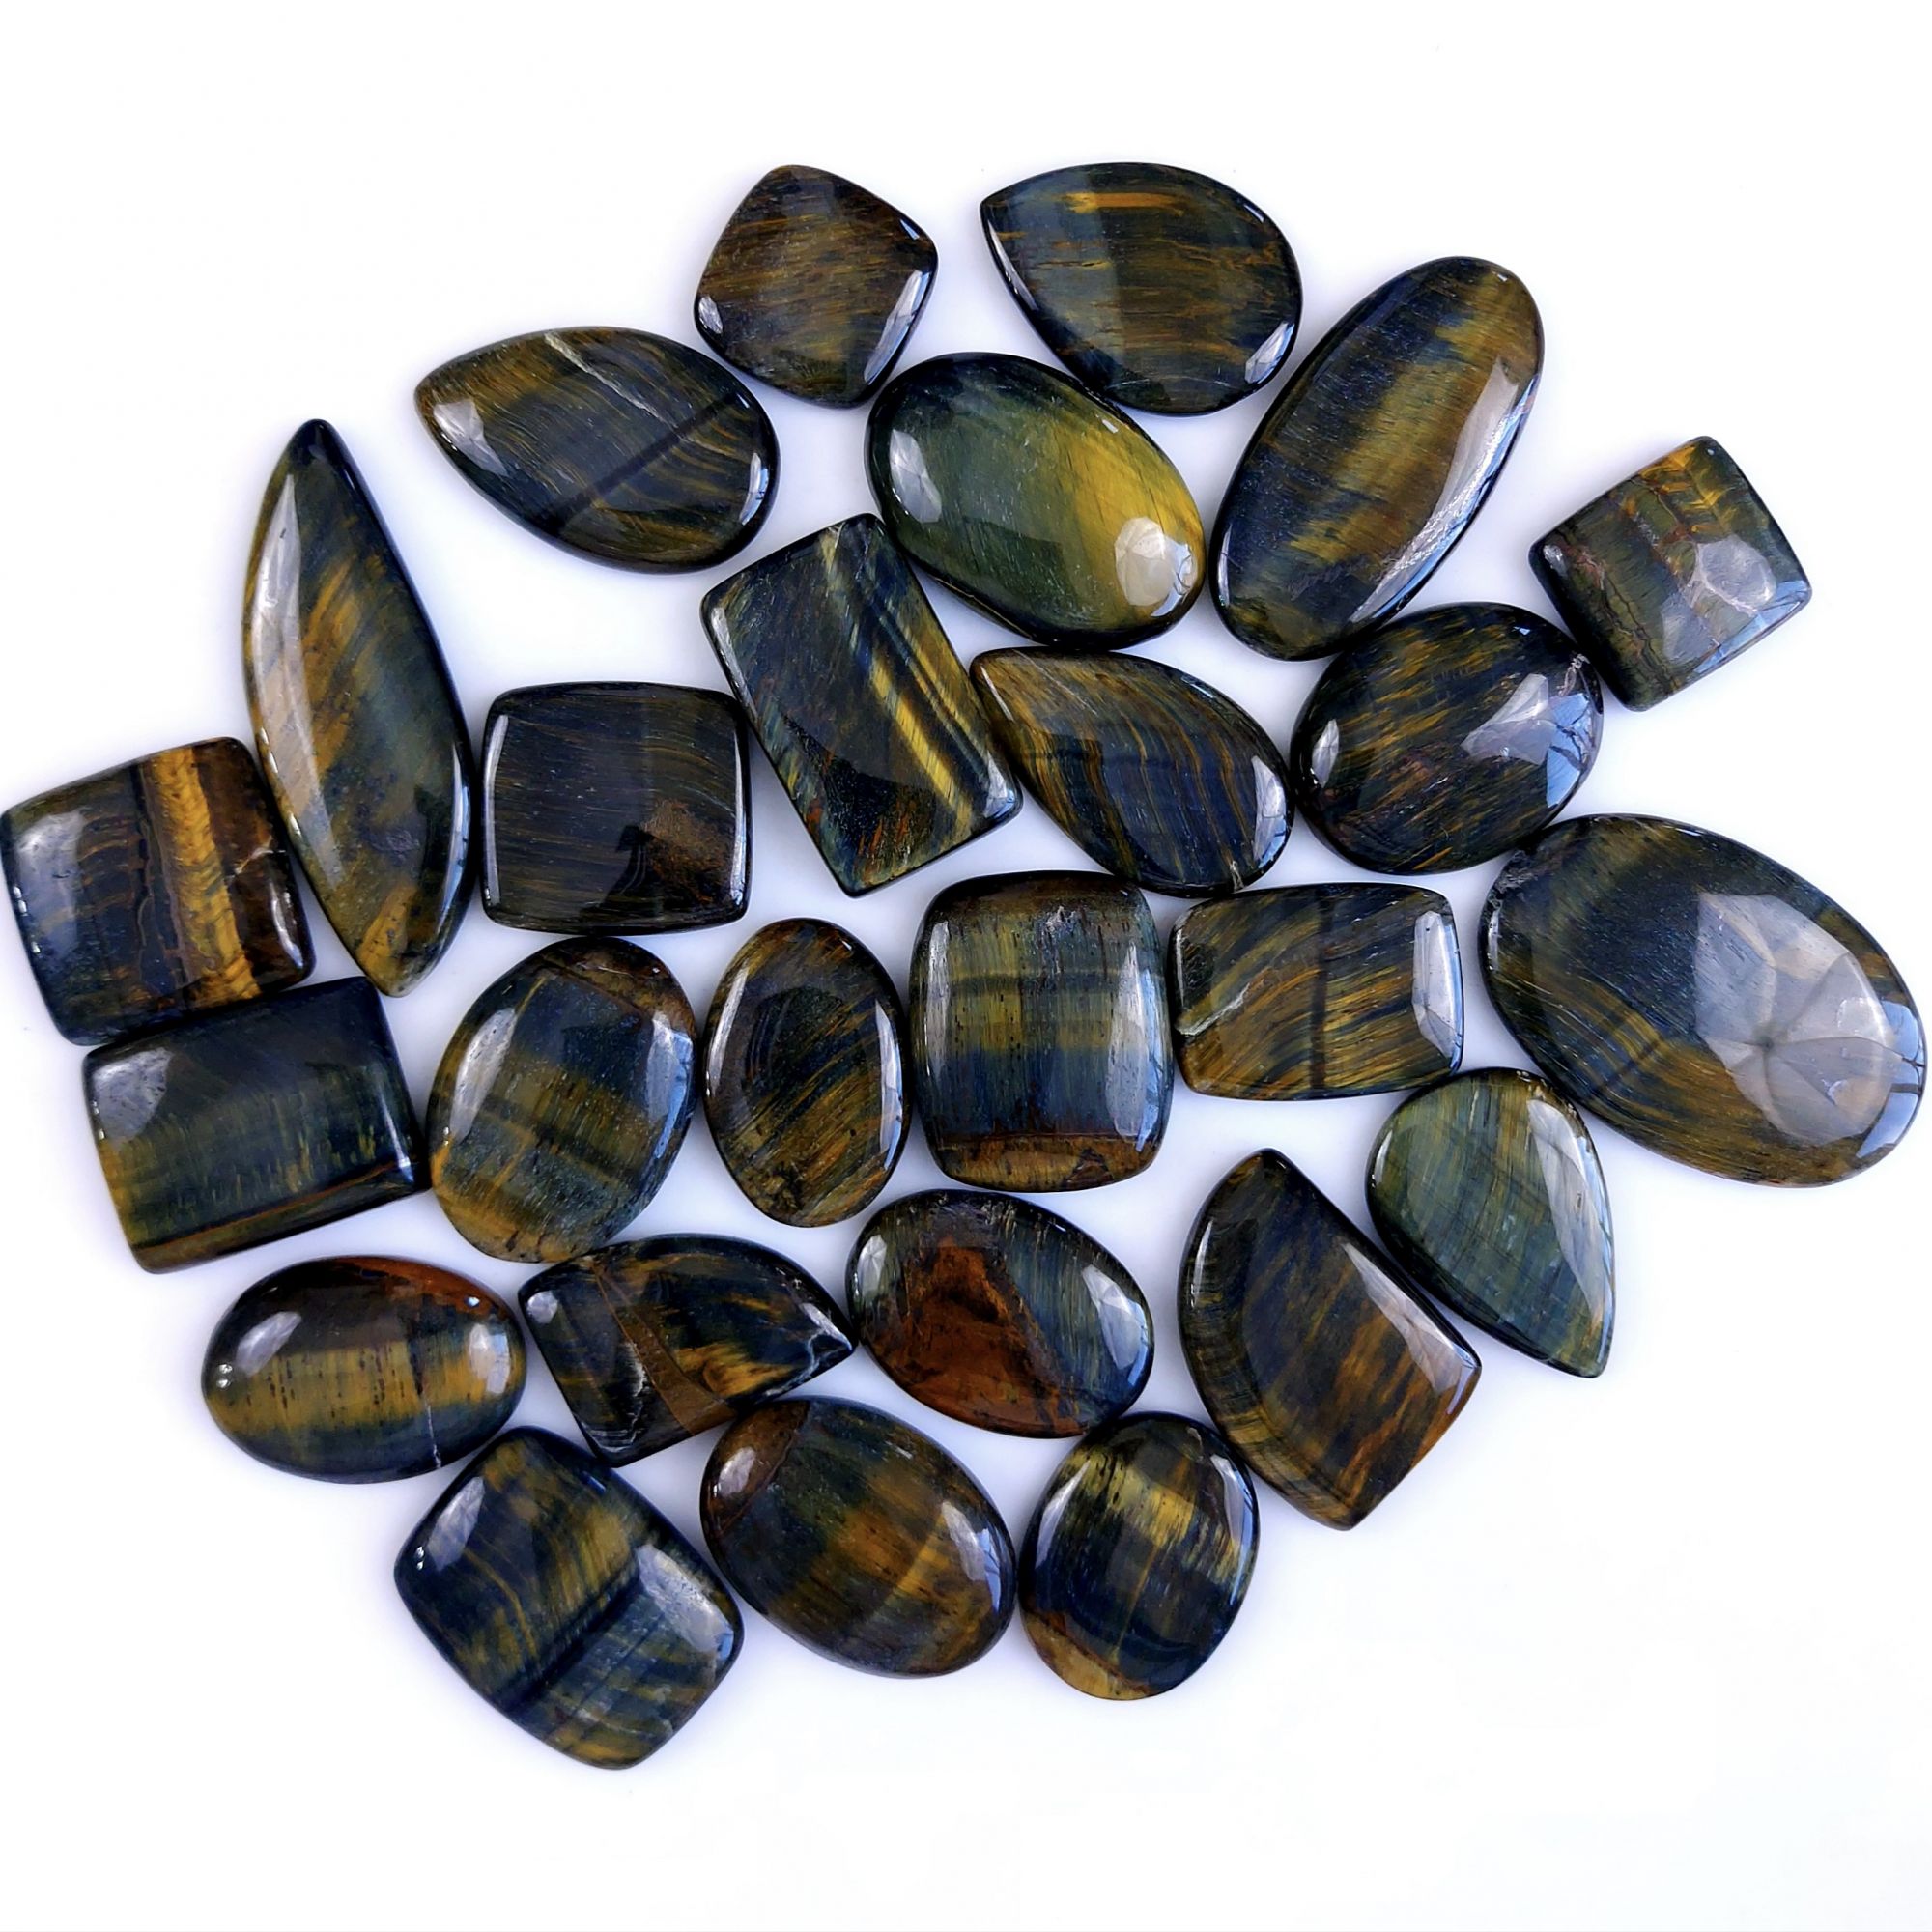 26Pcs 999Cts Natural Tiger Eye Loose Cabochon Gemstone Lot Mix Shape and and Size for Jewelry Making 45x30 28x20mm#1310